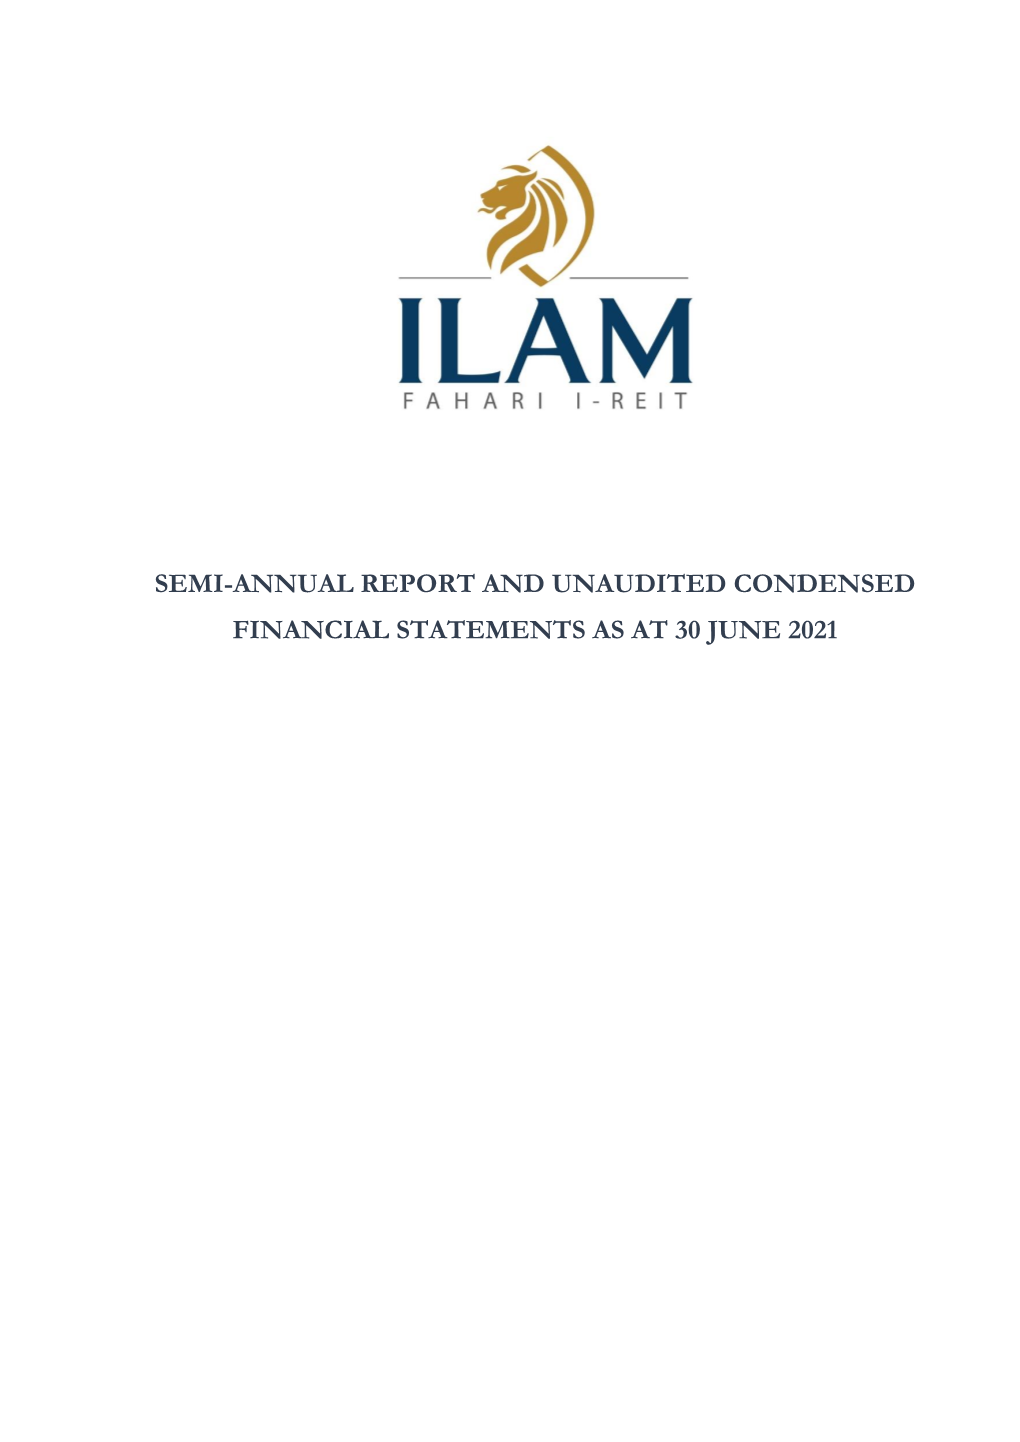 Semi-Annual Report and Unaudited Condensed Financial Statements As at 30 June 2021